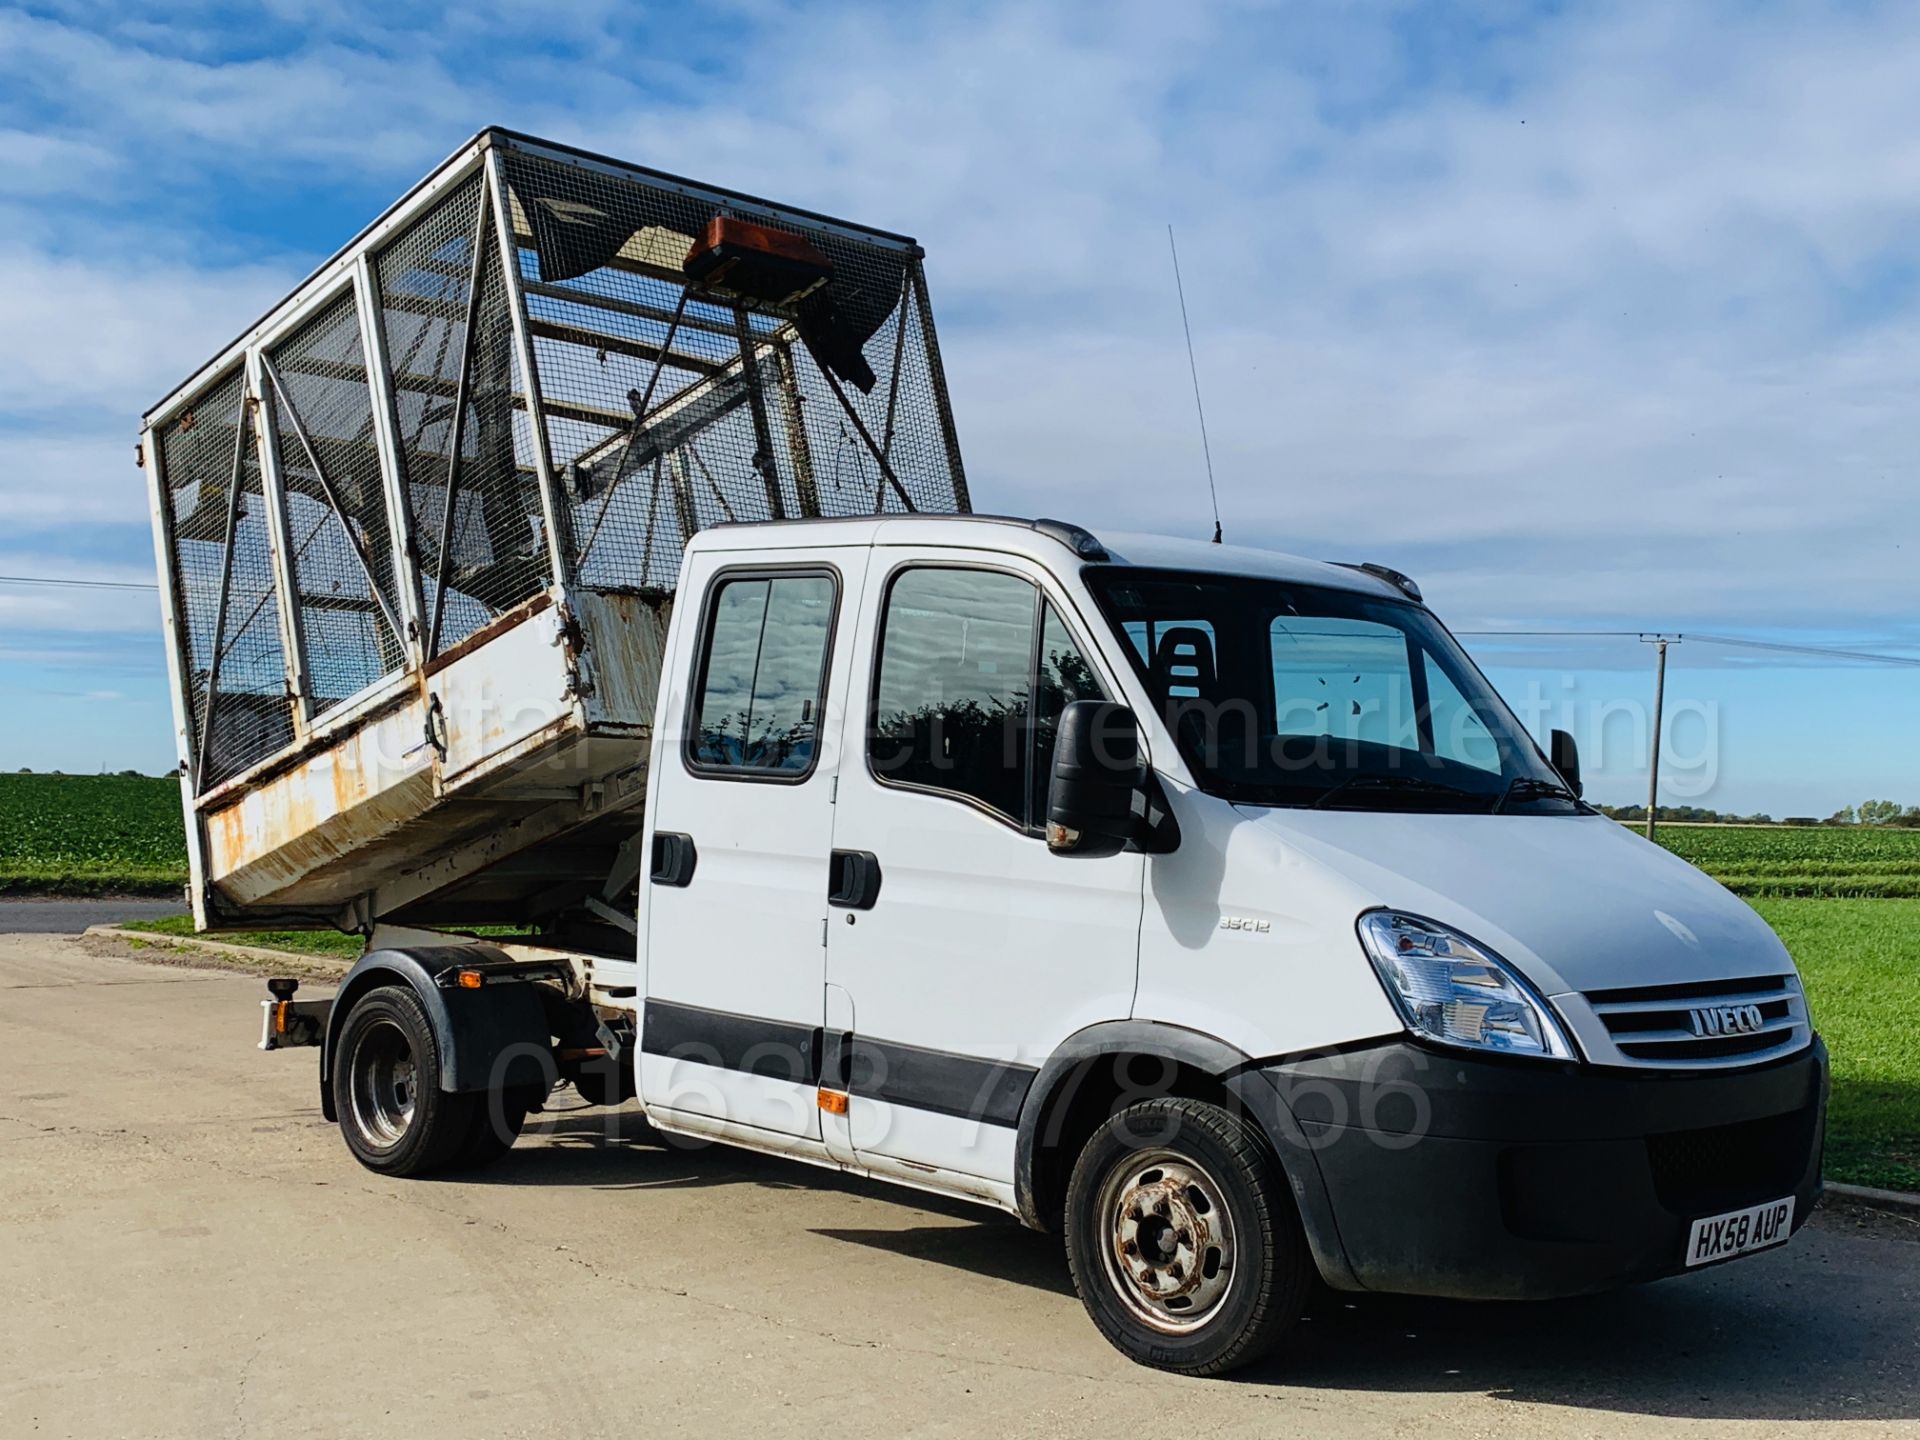 IVECO DAILY 35C12 *D/CAB - TIPPER* (2009 MODEL) '2.3 DIESEL - 115 BHP - 5 SPEED' *LOW MILES*